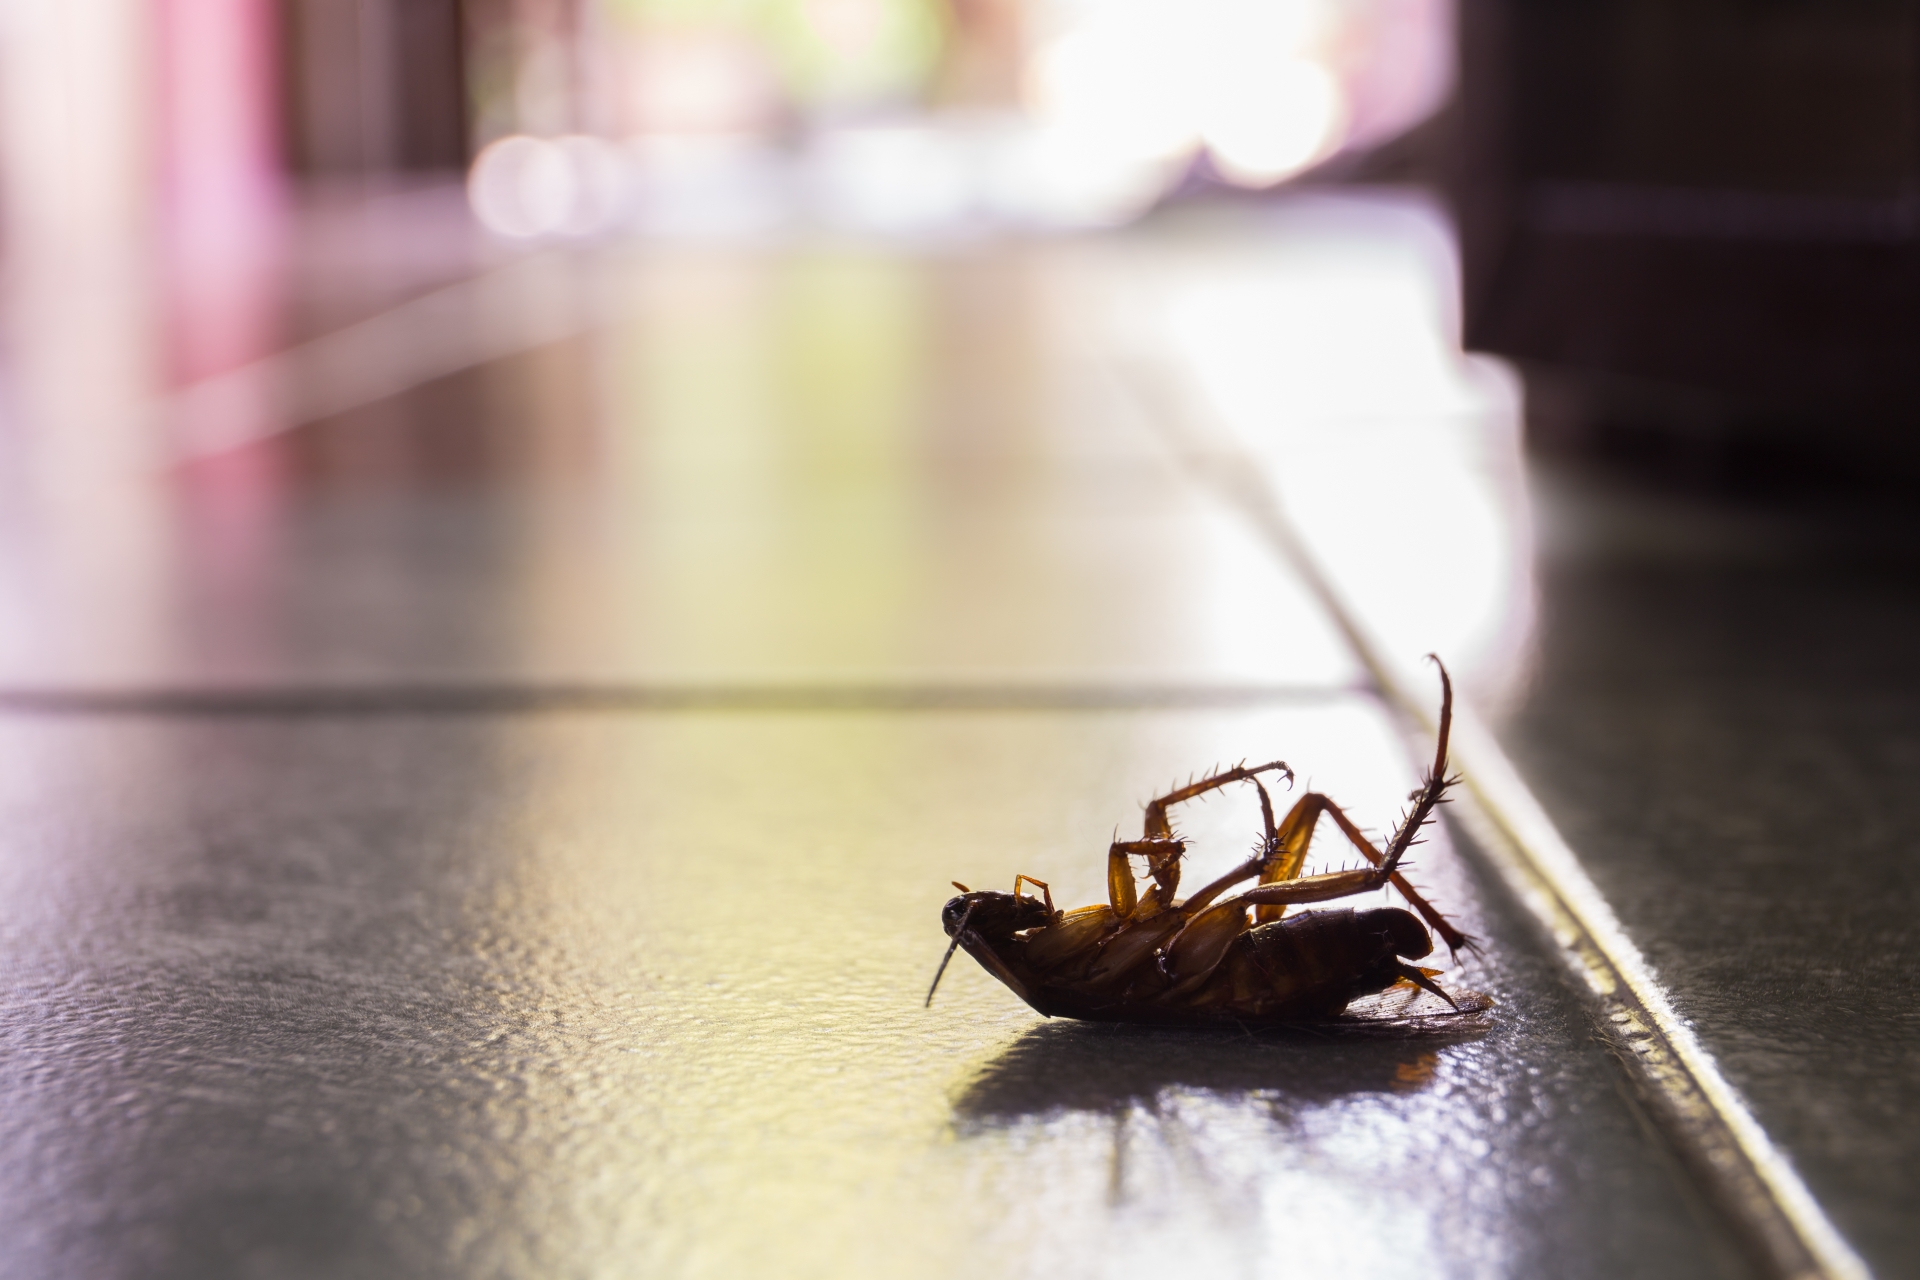 Cockroach Control, Pest Control in Molesey, East Molesey, West Molesey, KT8. Call Now 020 8166 9746